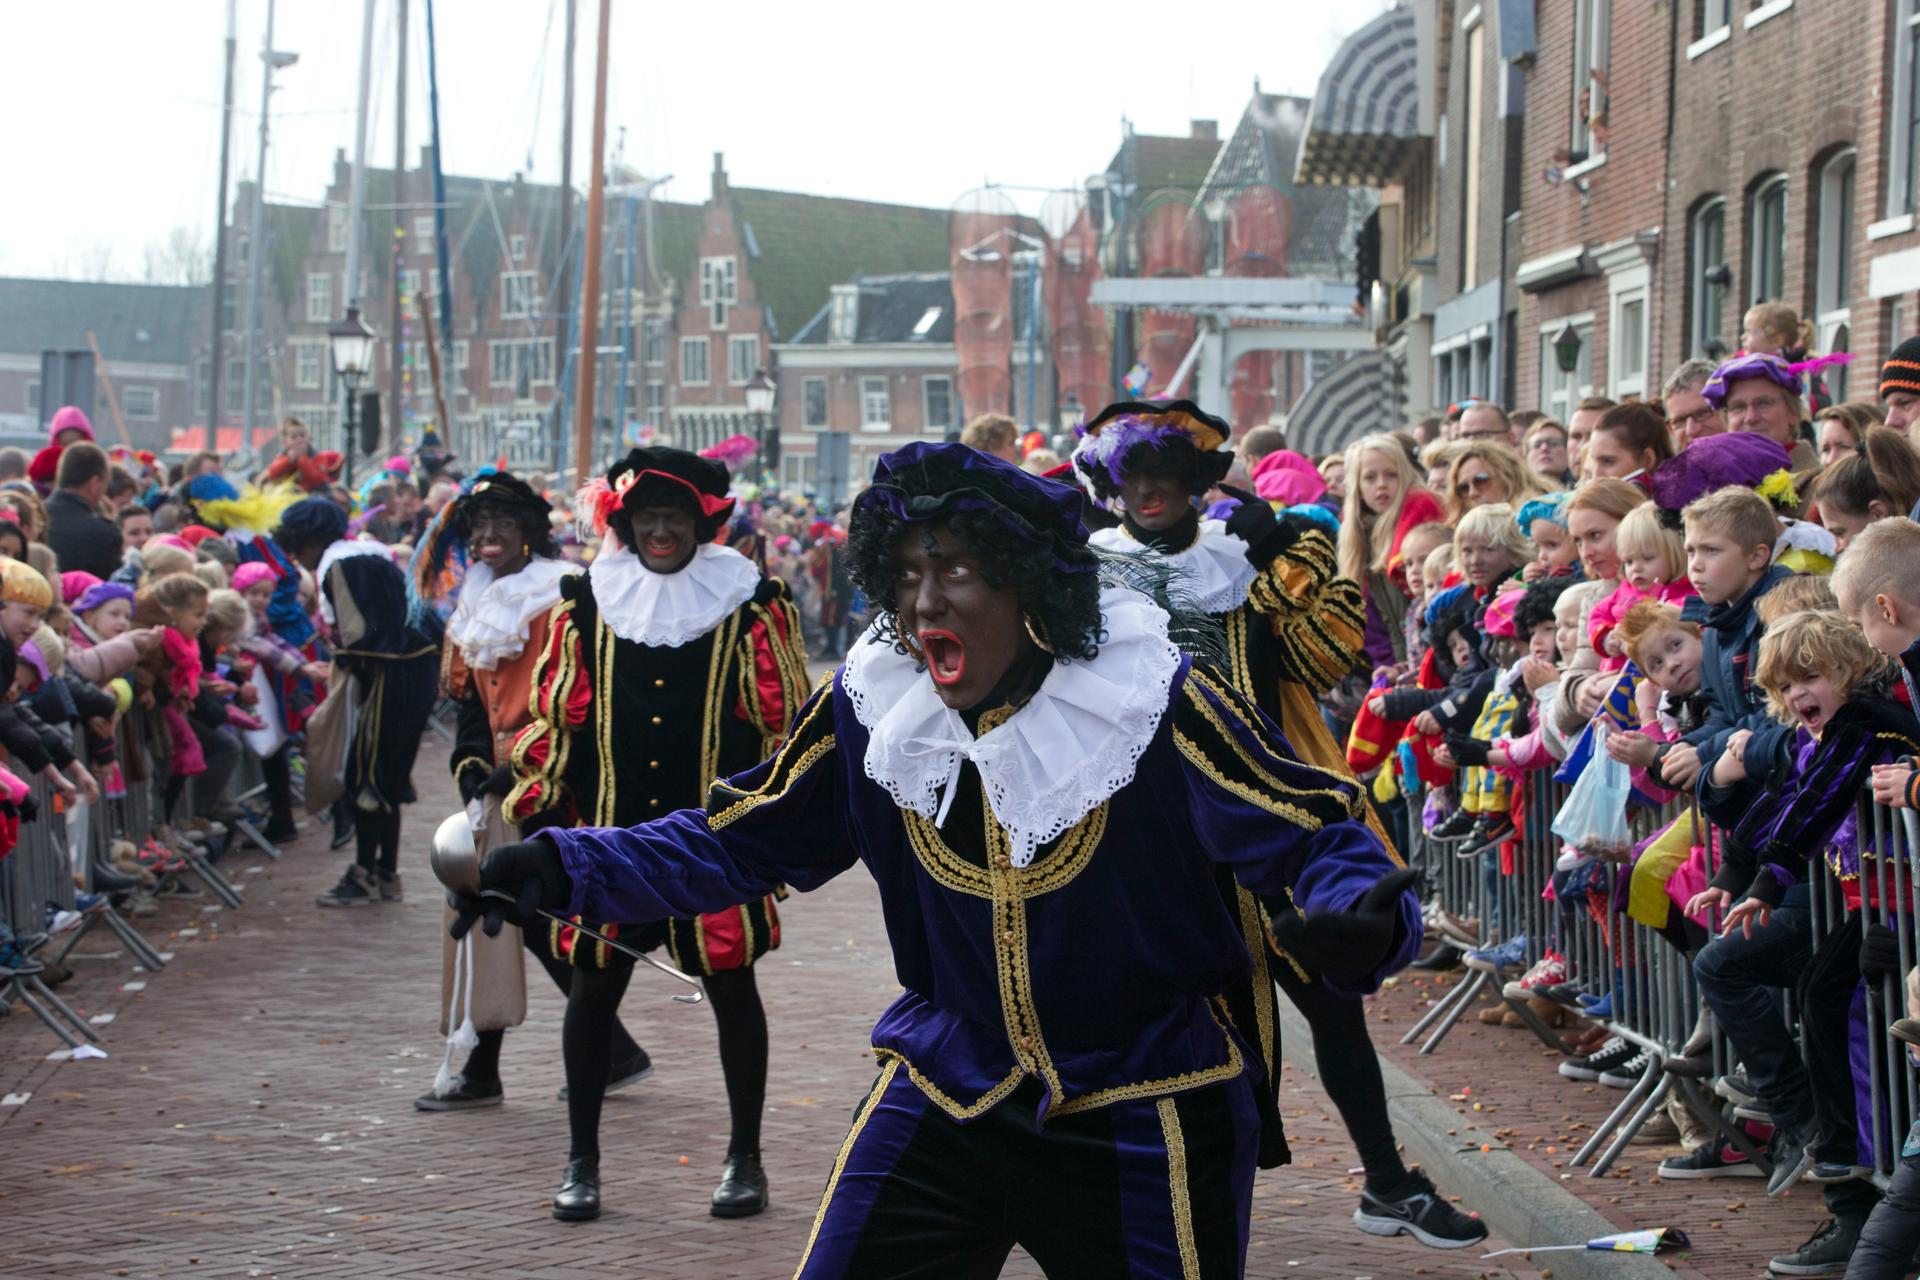 Dutch white people in blackface and colorful costumes